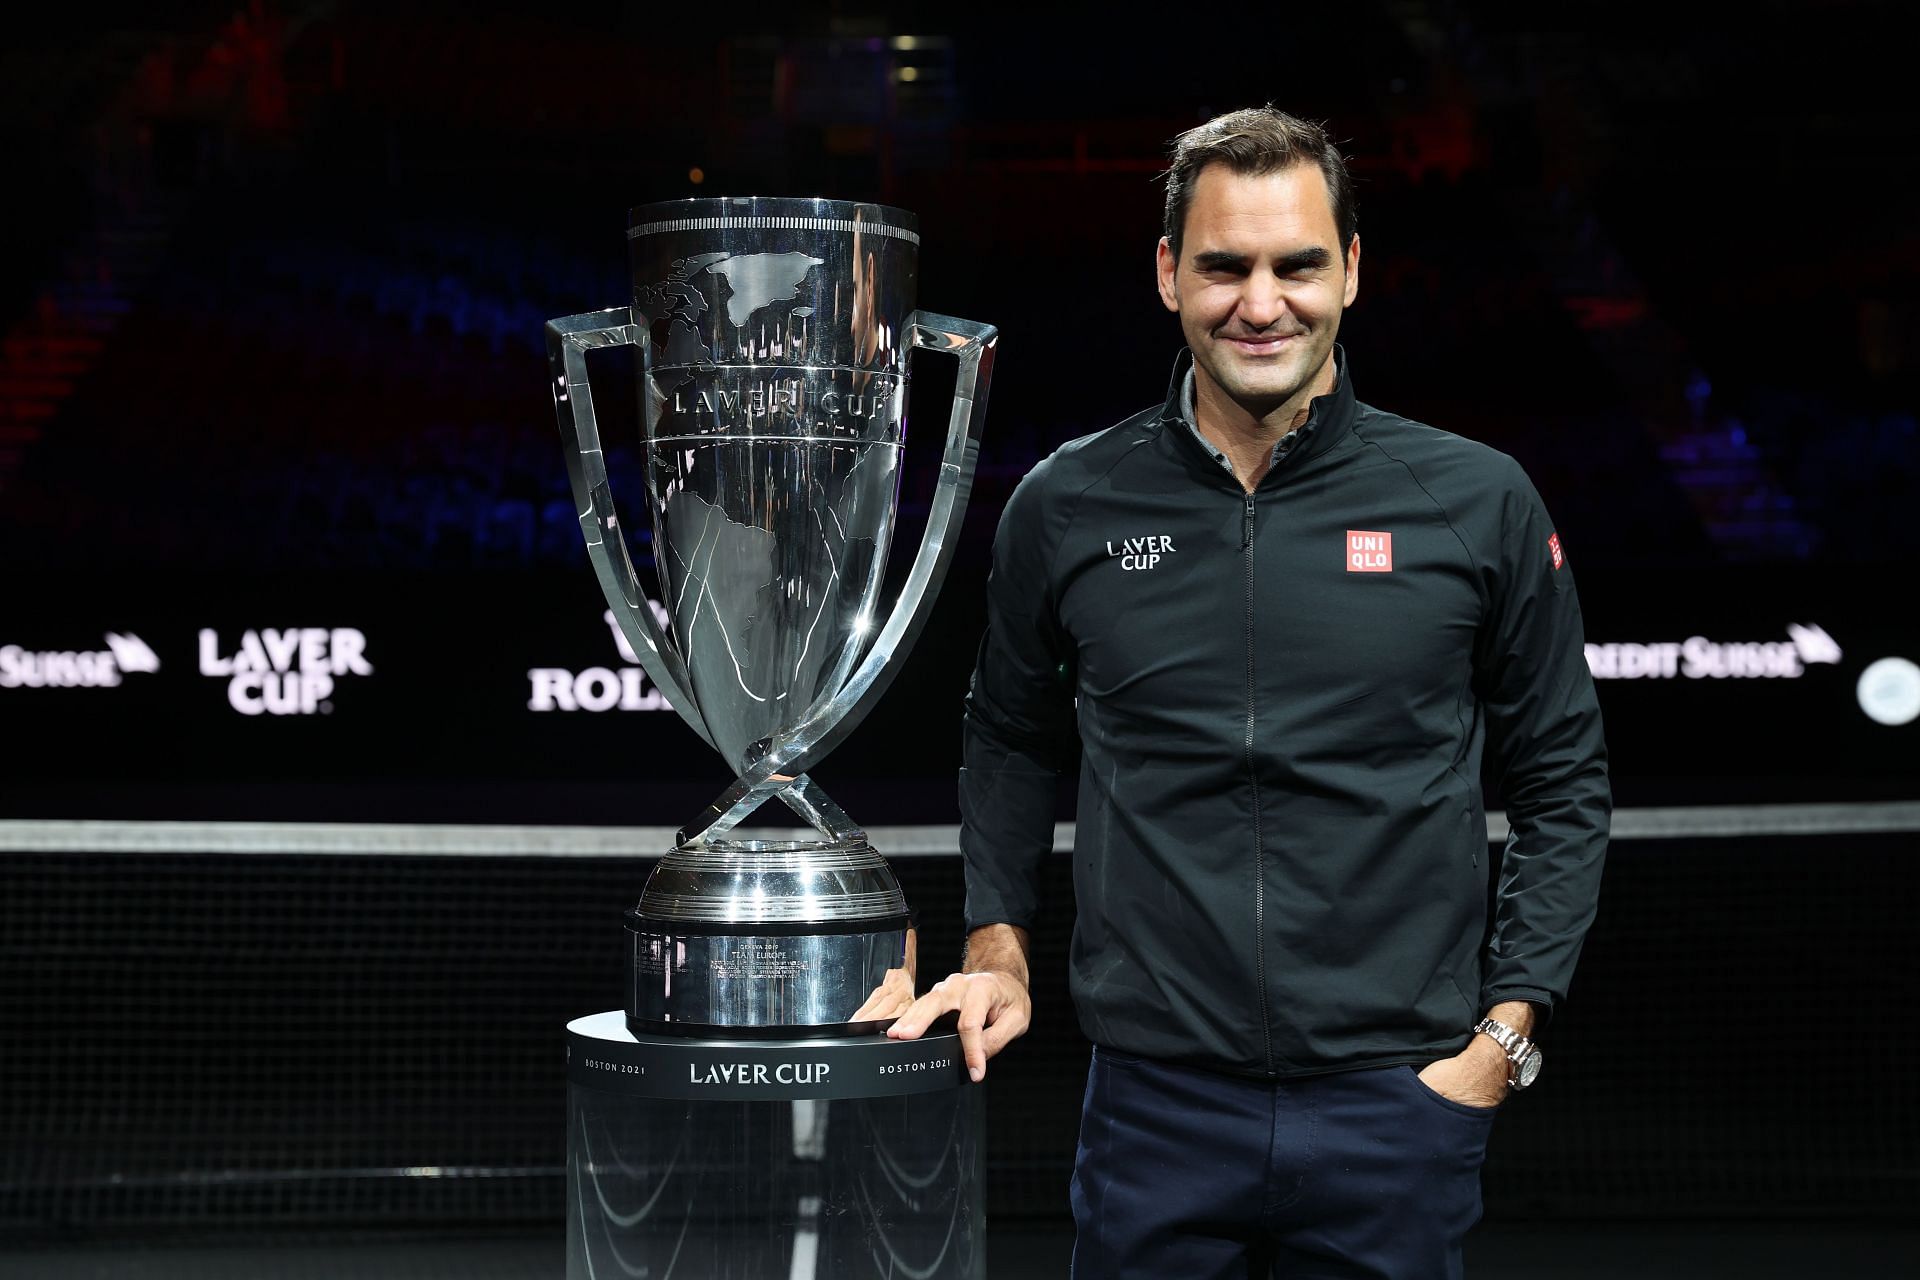 Roger Federer with the Laver Cup trophy at the 2021 Laver Cup